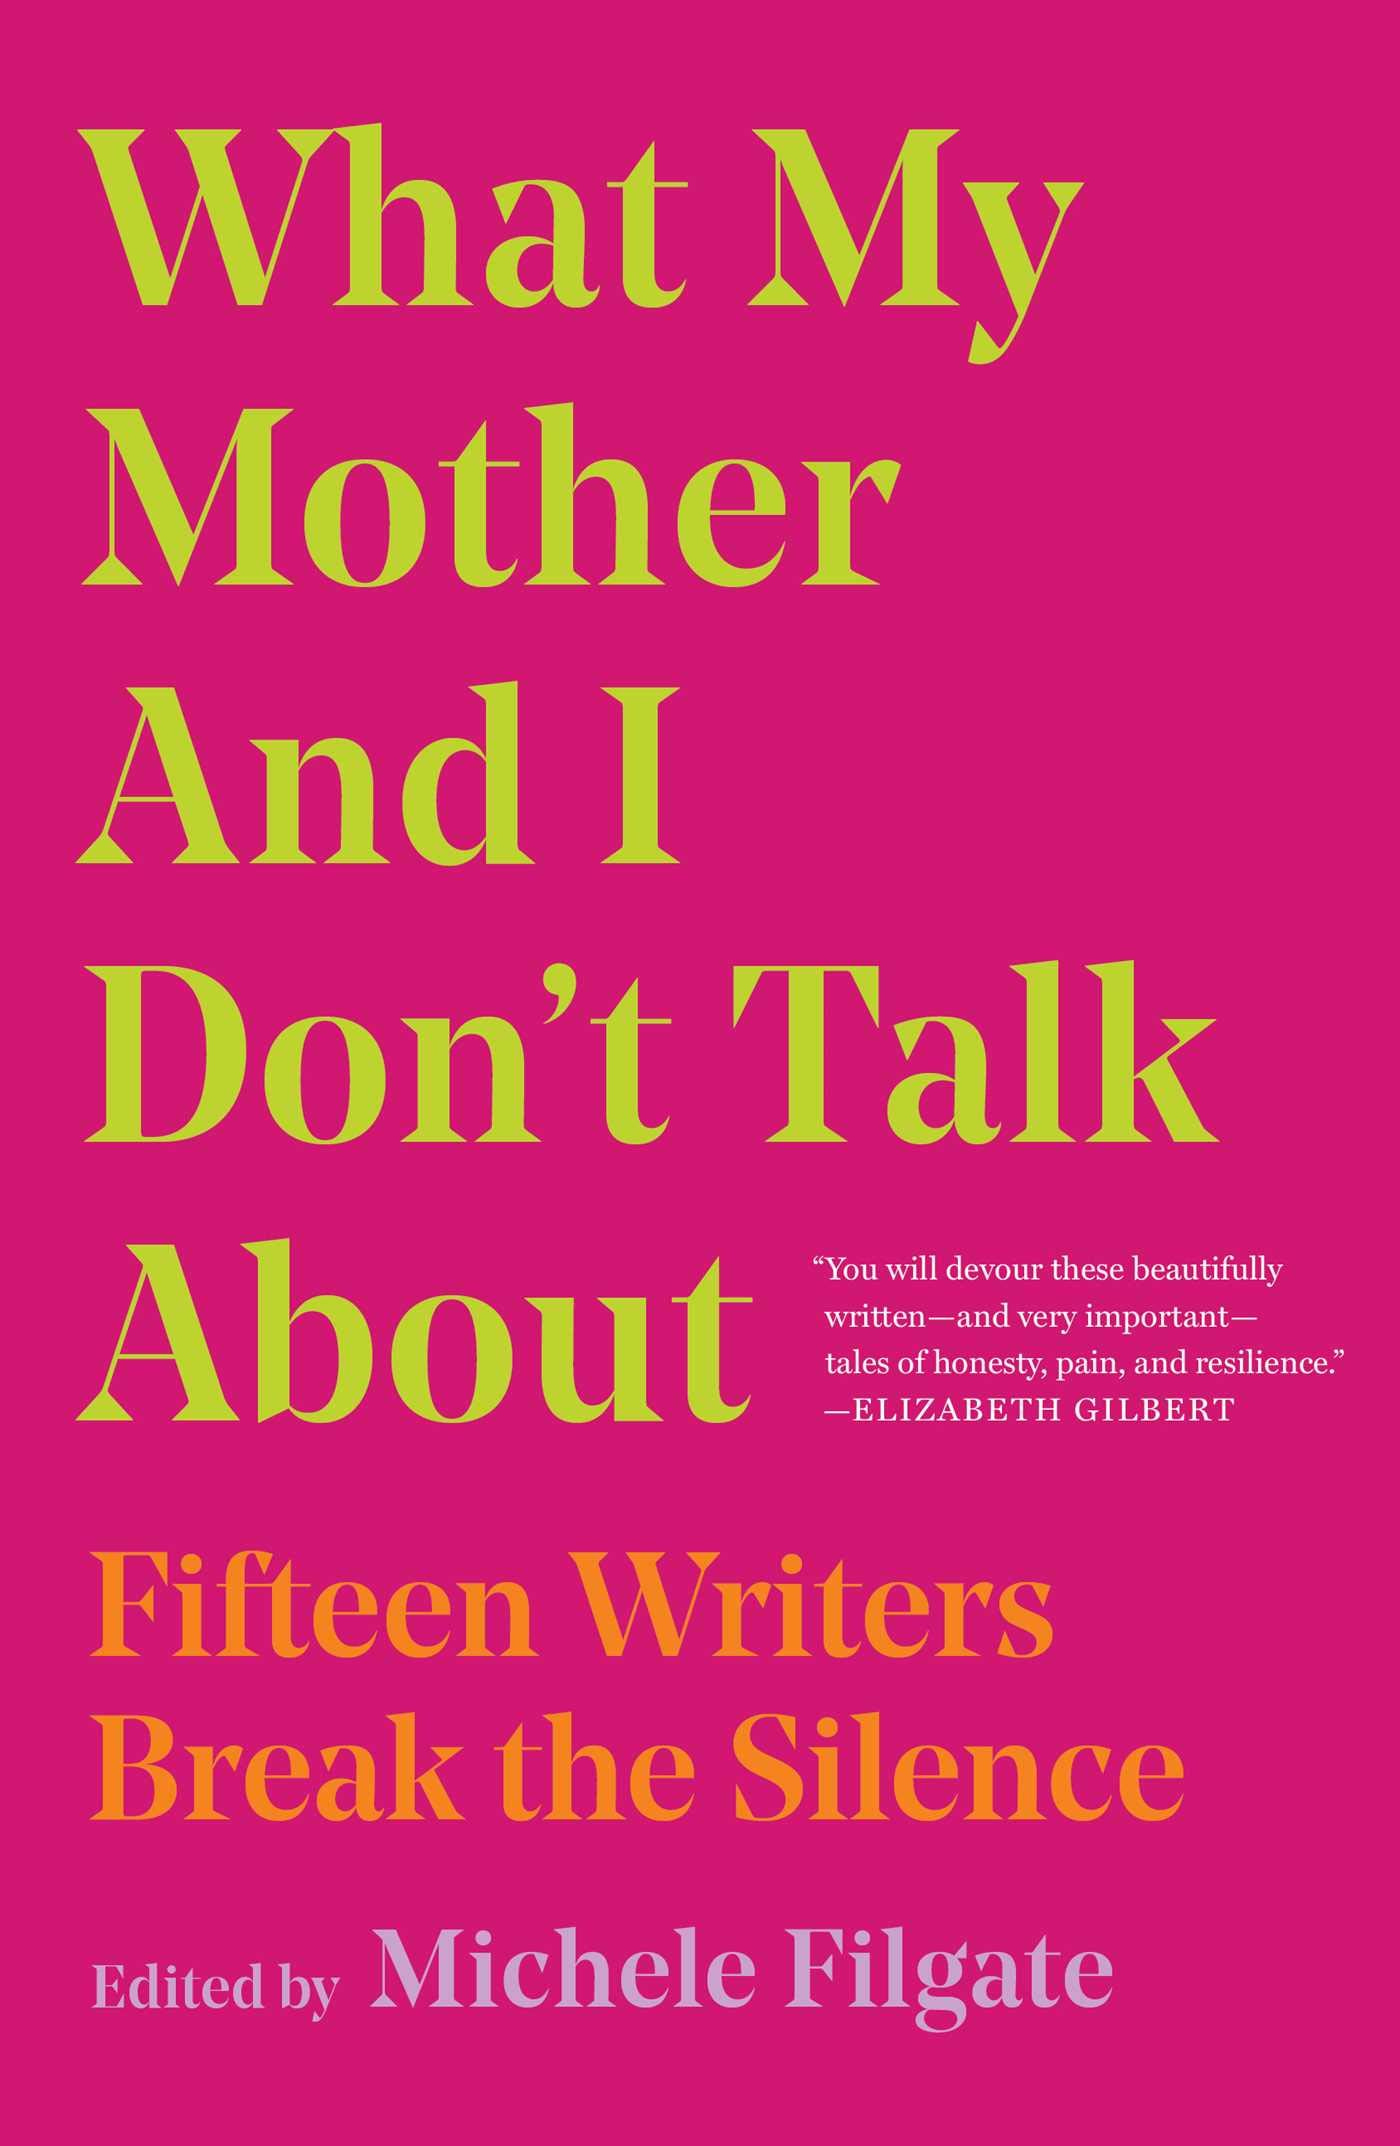 What My Mother and I Don't Talk About: Fifteen Writers Break the Silence:  Filgate, Michele: 9781982107345: Amazon.com: Books